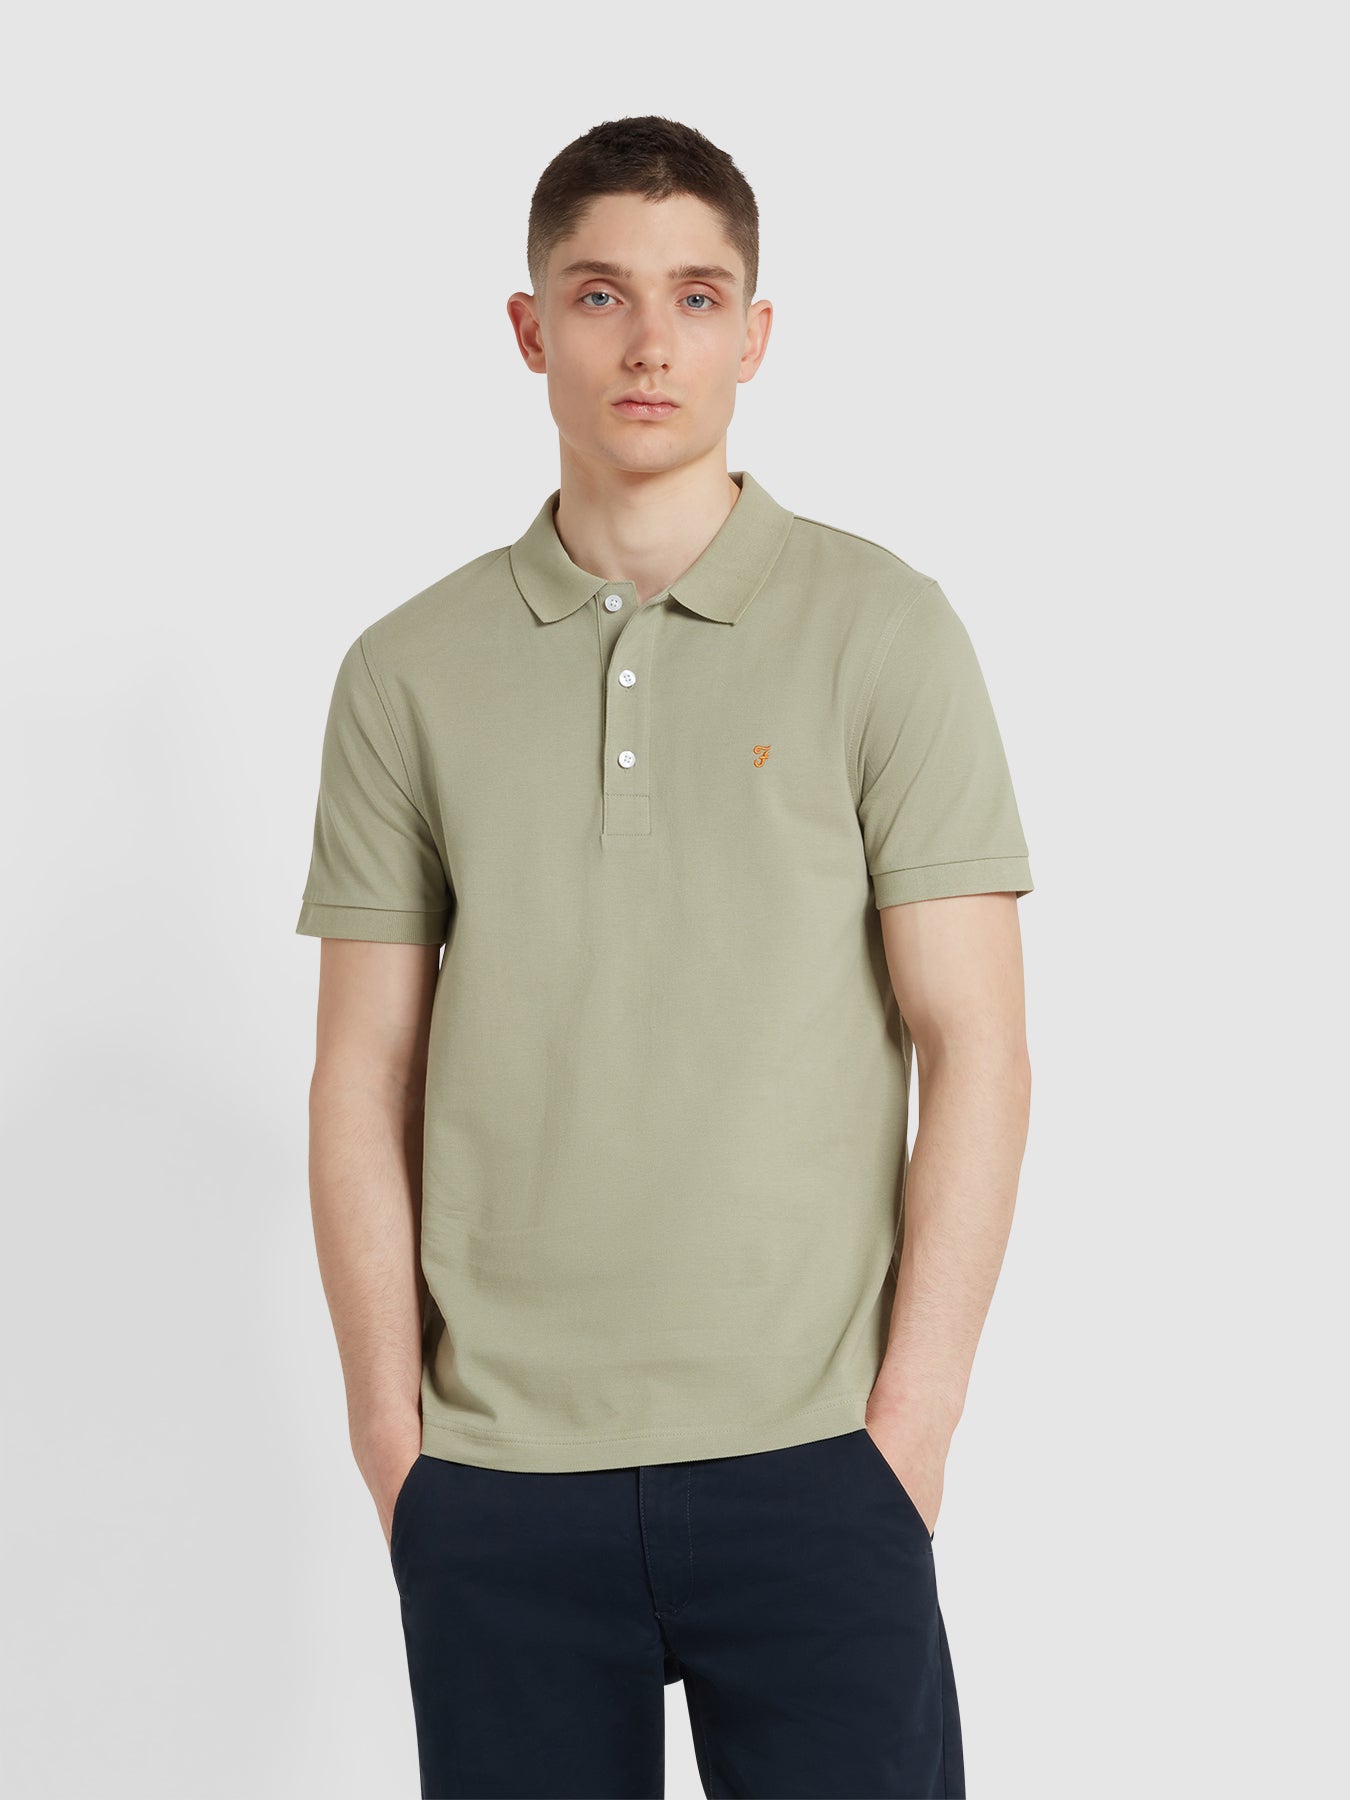 View Blanes Organic Cotton Short Sleeve Polo Shirt In Balsam information